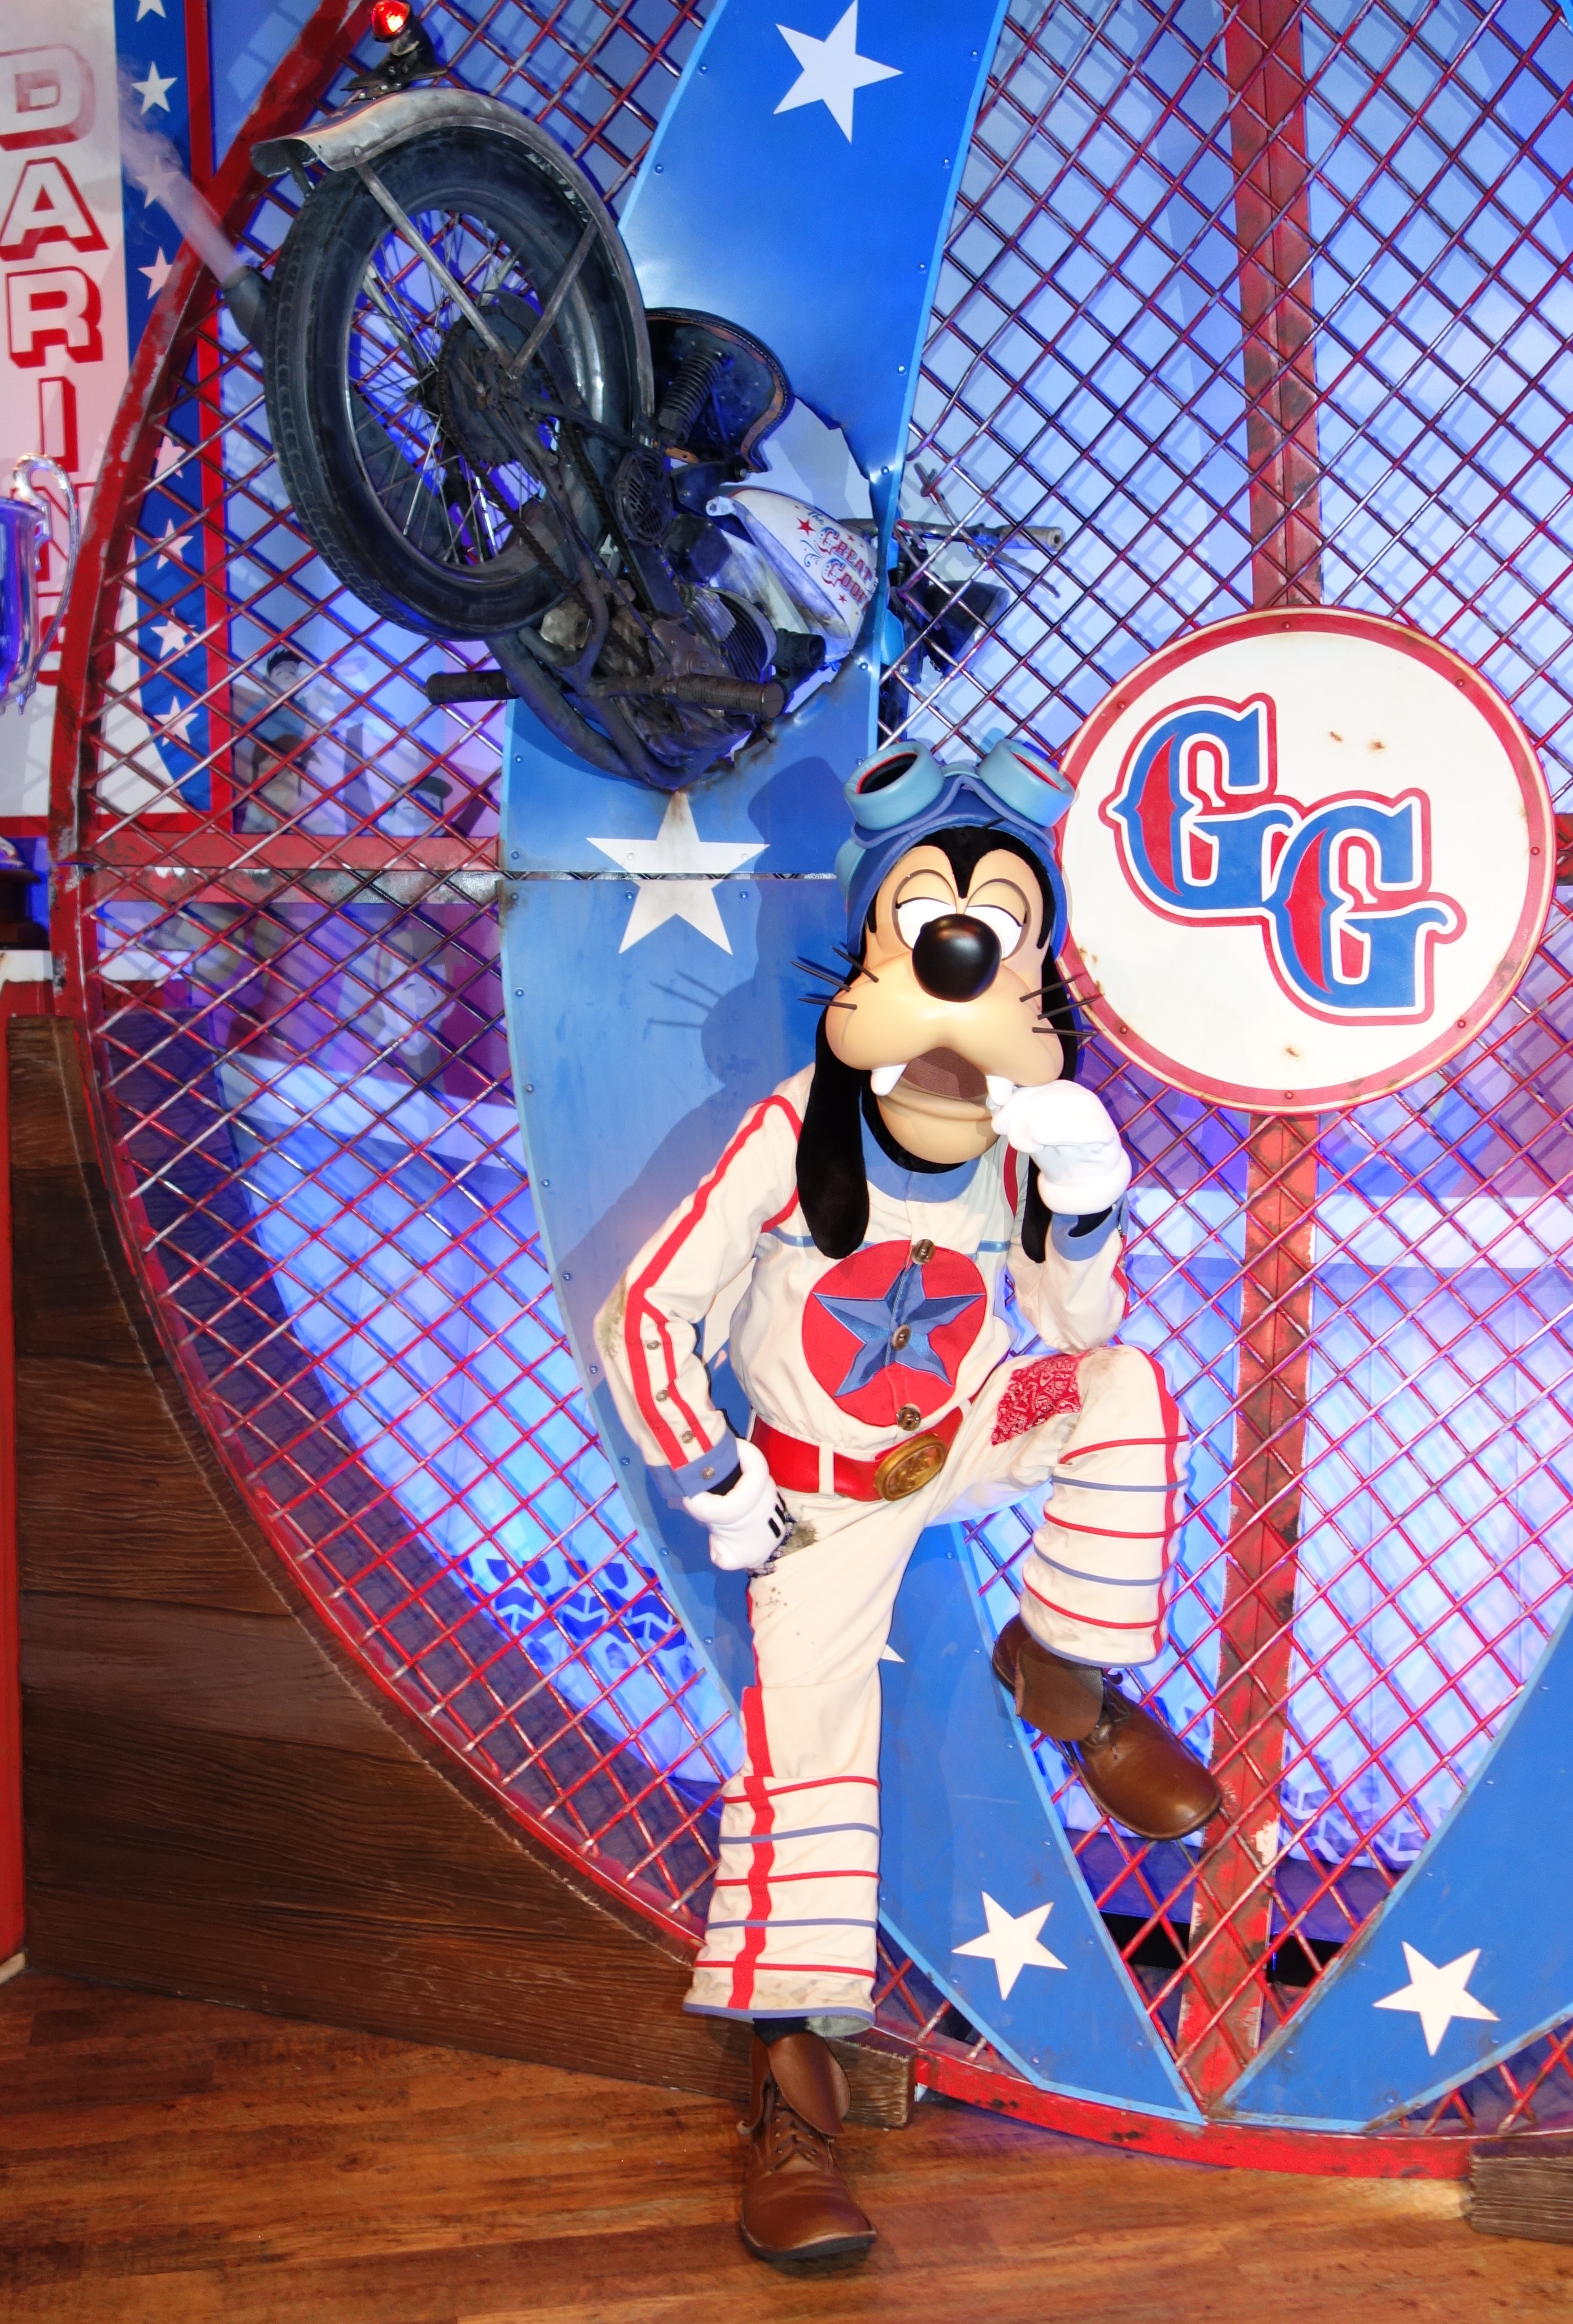 I asked Goofy to pose for me and he went all GQ on me.